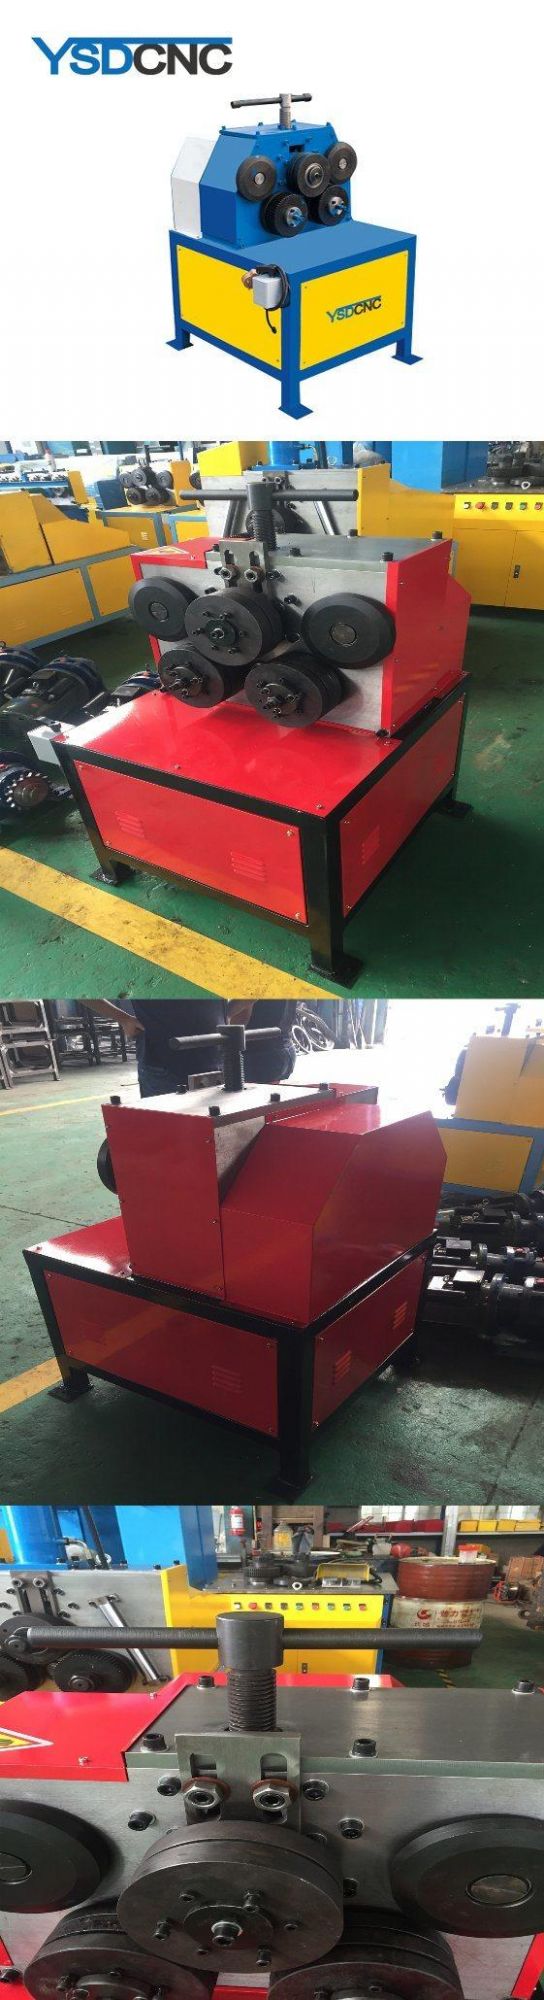 China Affordable Electric Angle Steel Bender Machine